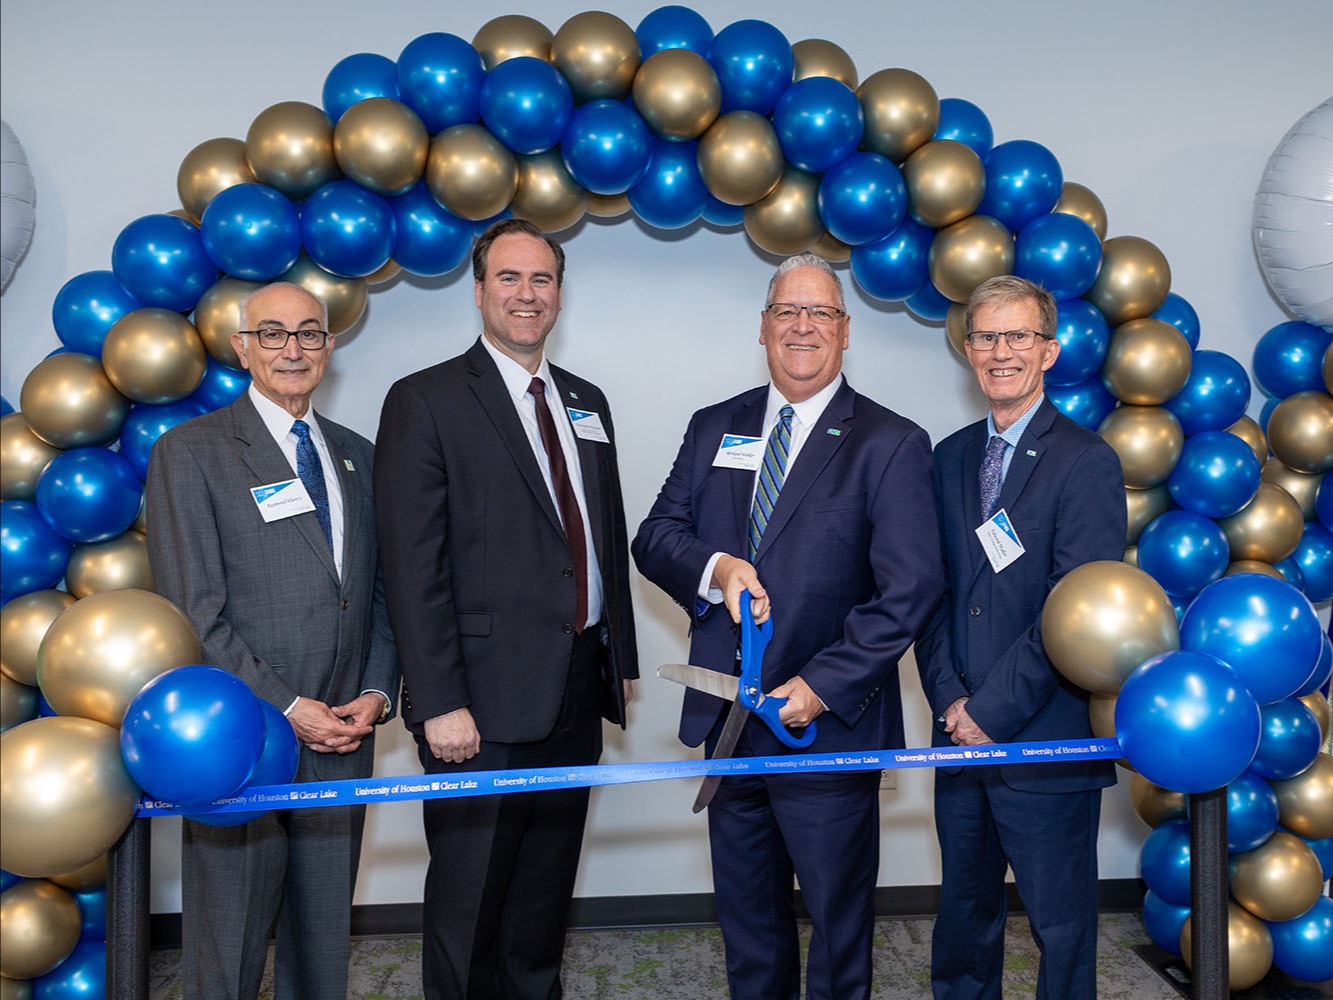 Dr. Raymond Khoury, Department Chair for Healthcare Administration; Dr. Christopher Maynard, Senior Vice President for Academic Affairs and Provost; Dr. Richard Walker, President; Dr. Edward Waller, COB Dean